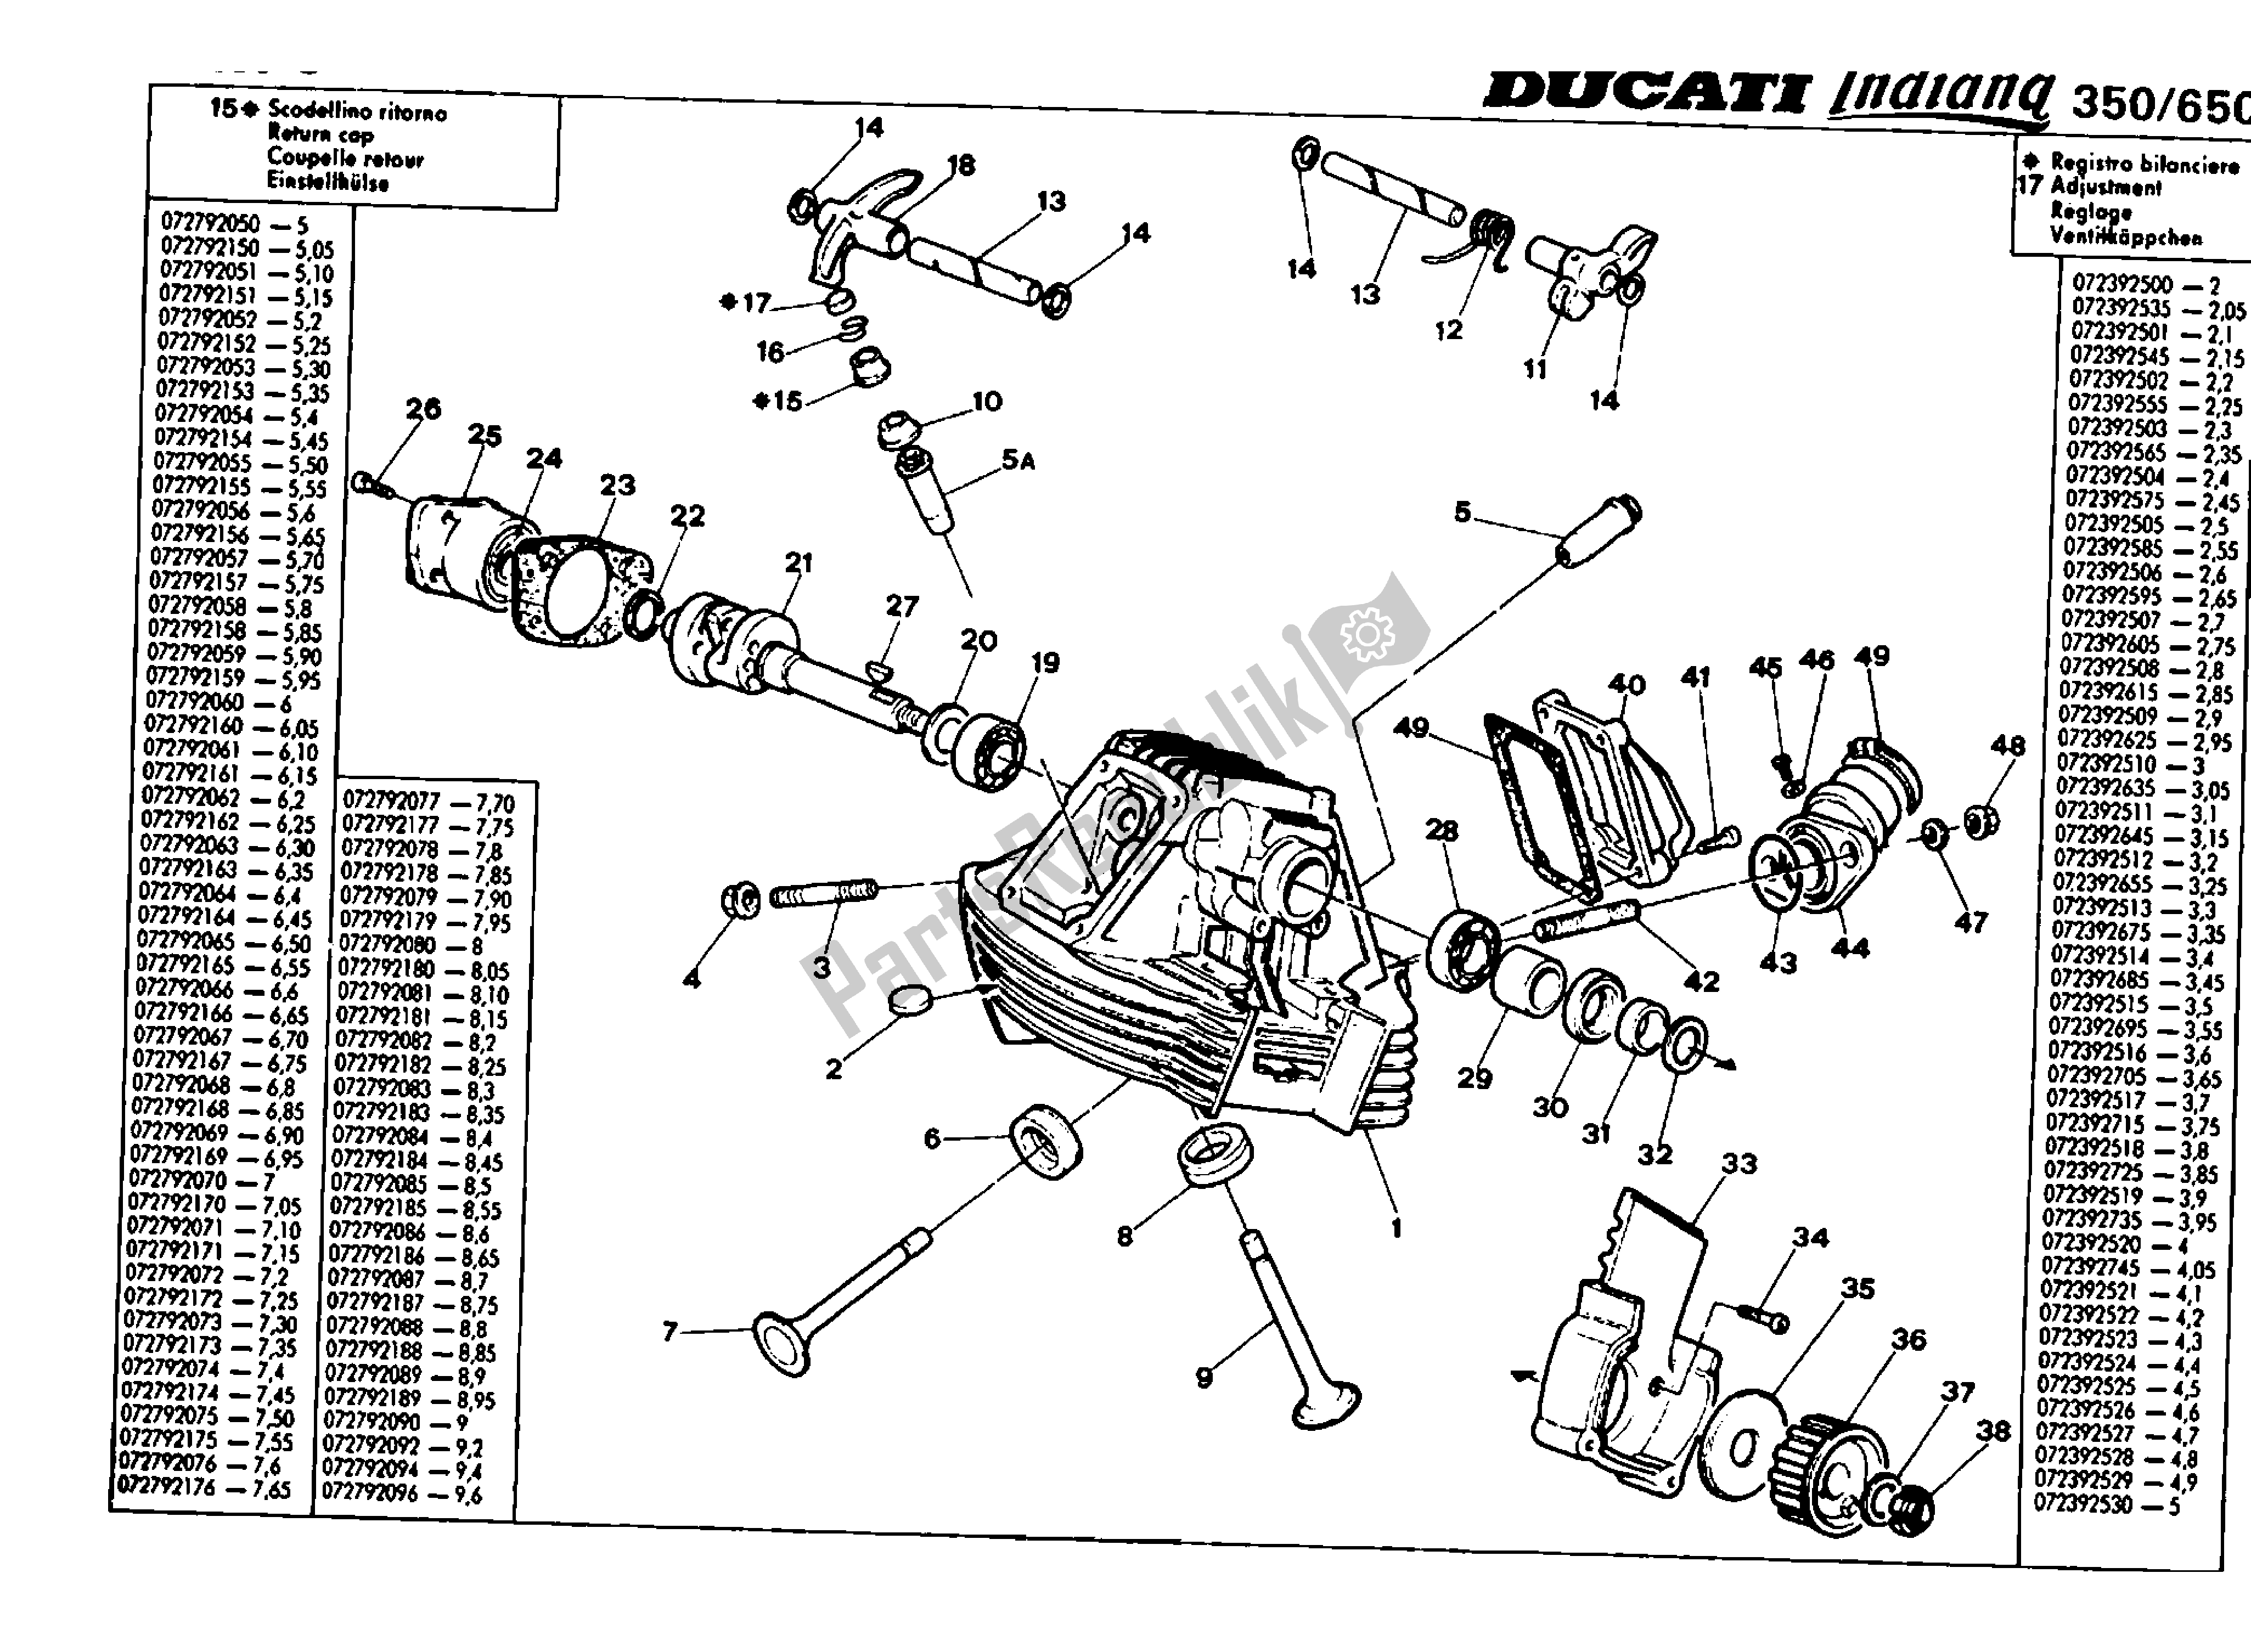 All parts for the Vertical Head of the Ducati Indiana 650 1986 - 1987